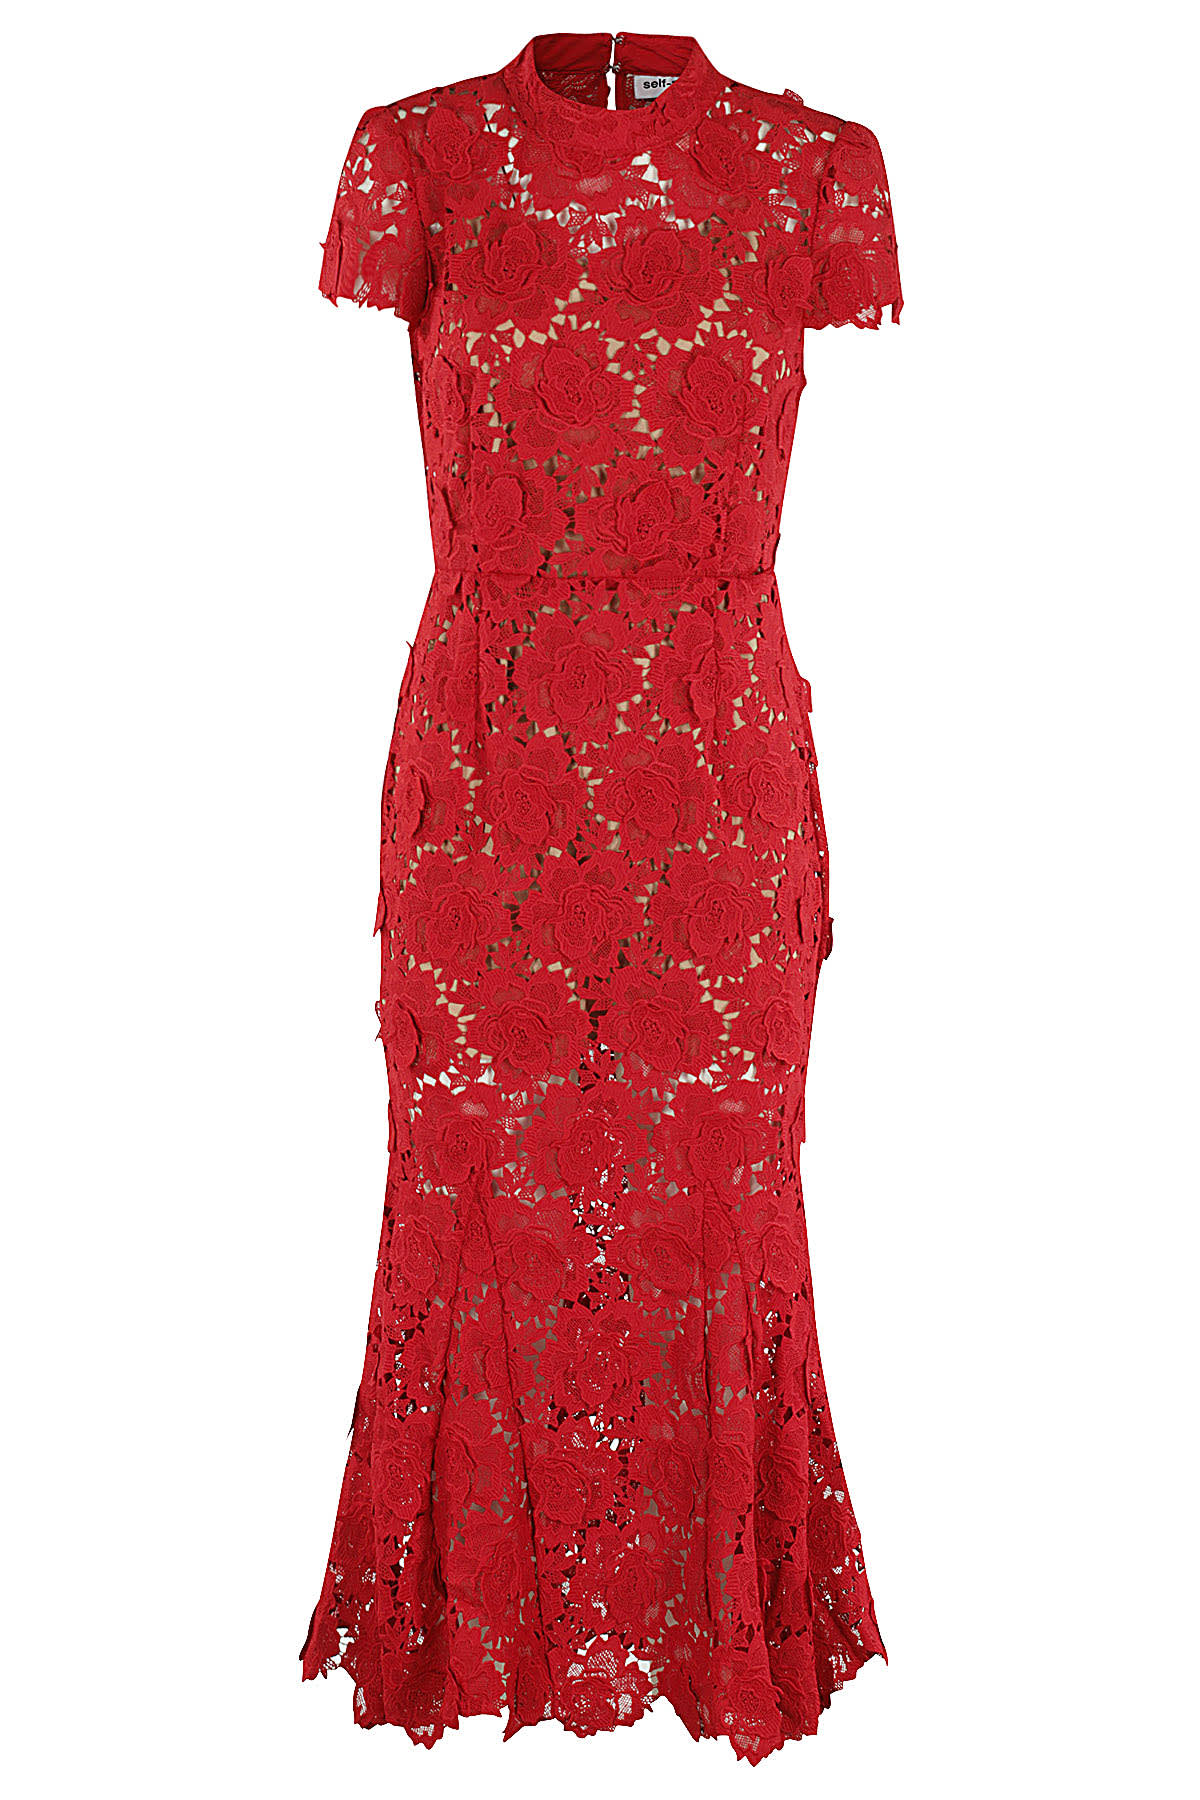 SELF-PORTRAIT Cutout crystal-embellished lace and satin maxi dress